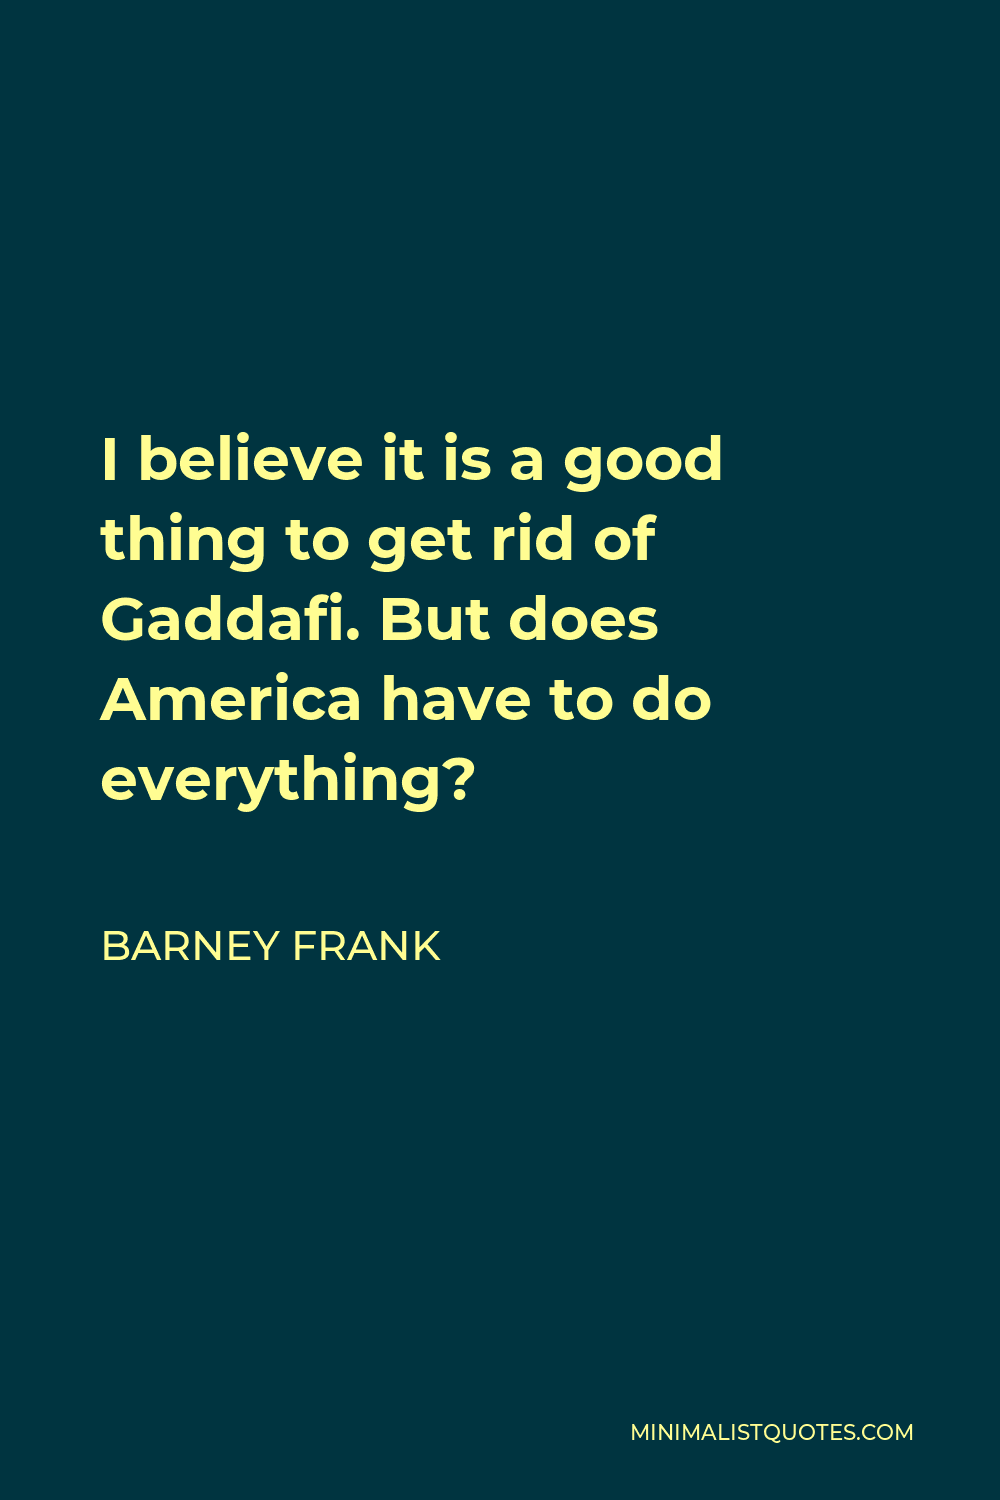 Barney Frank Quote - I believe it is a good thing to get rid of Gaddafi. But does America have to do everything?